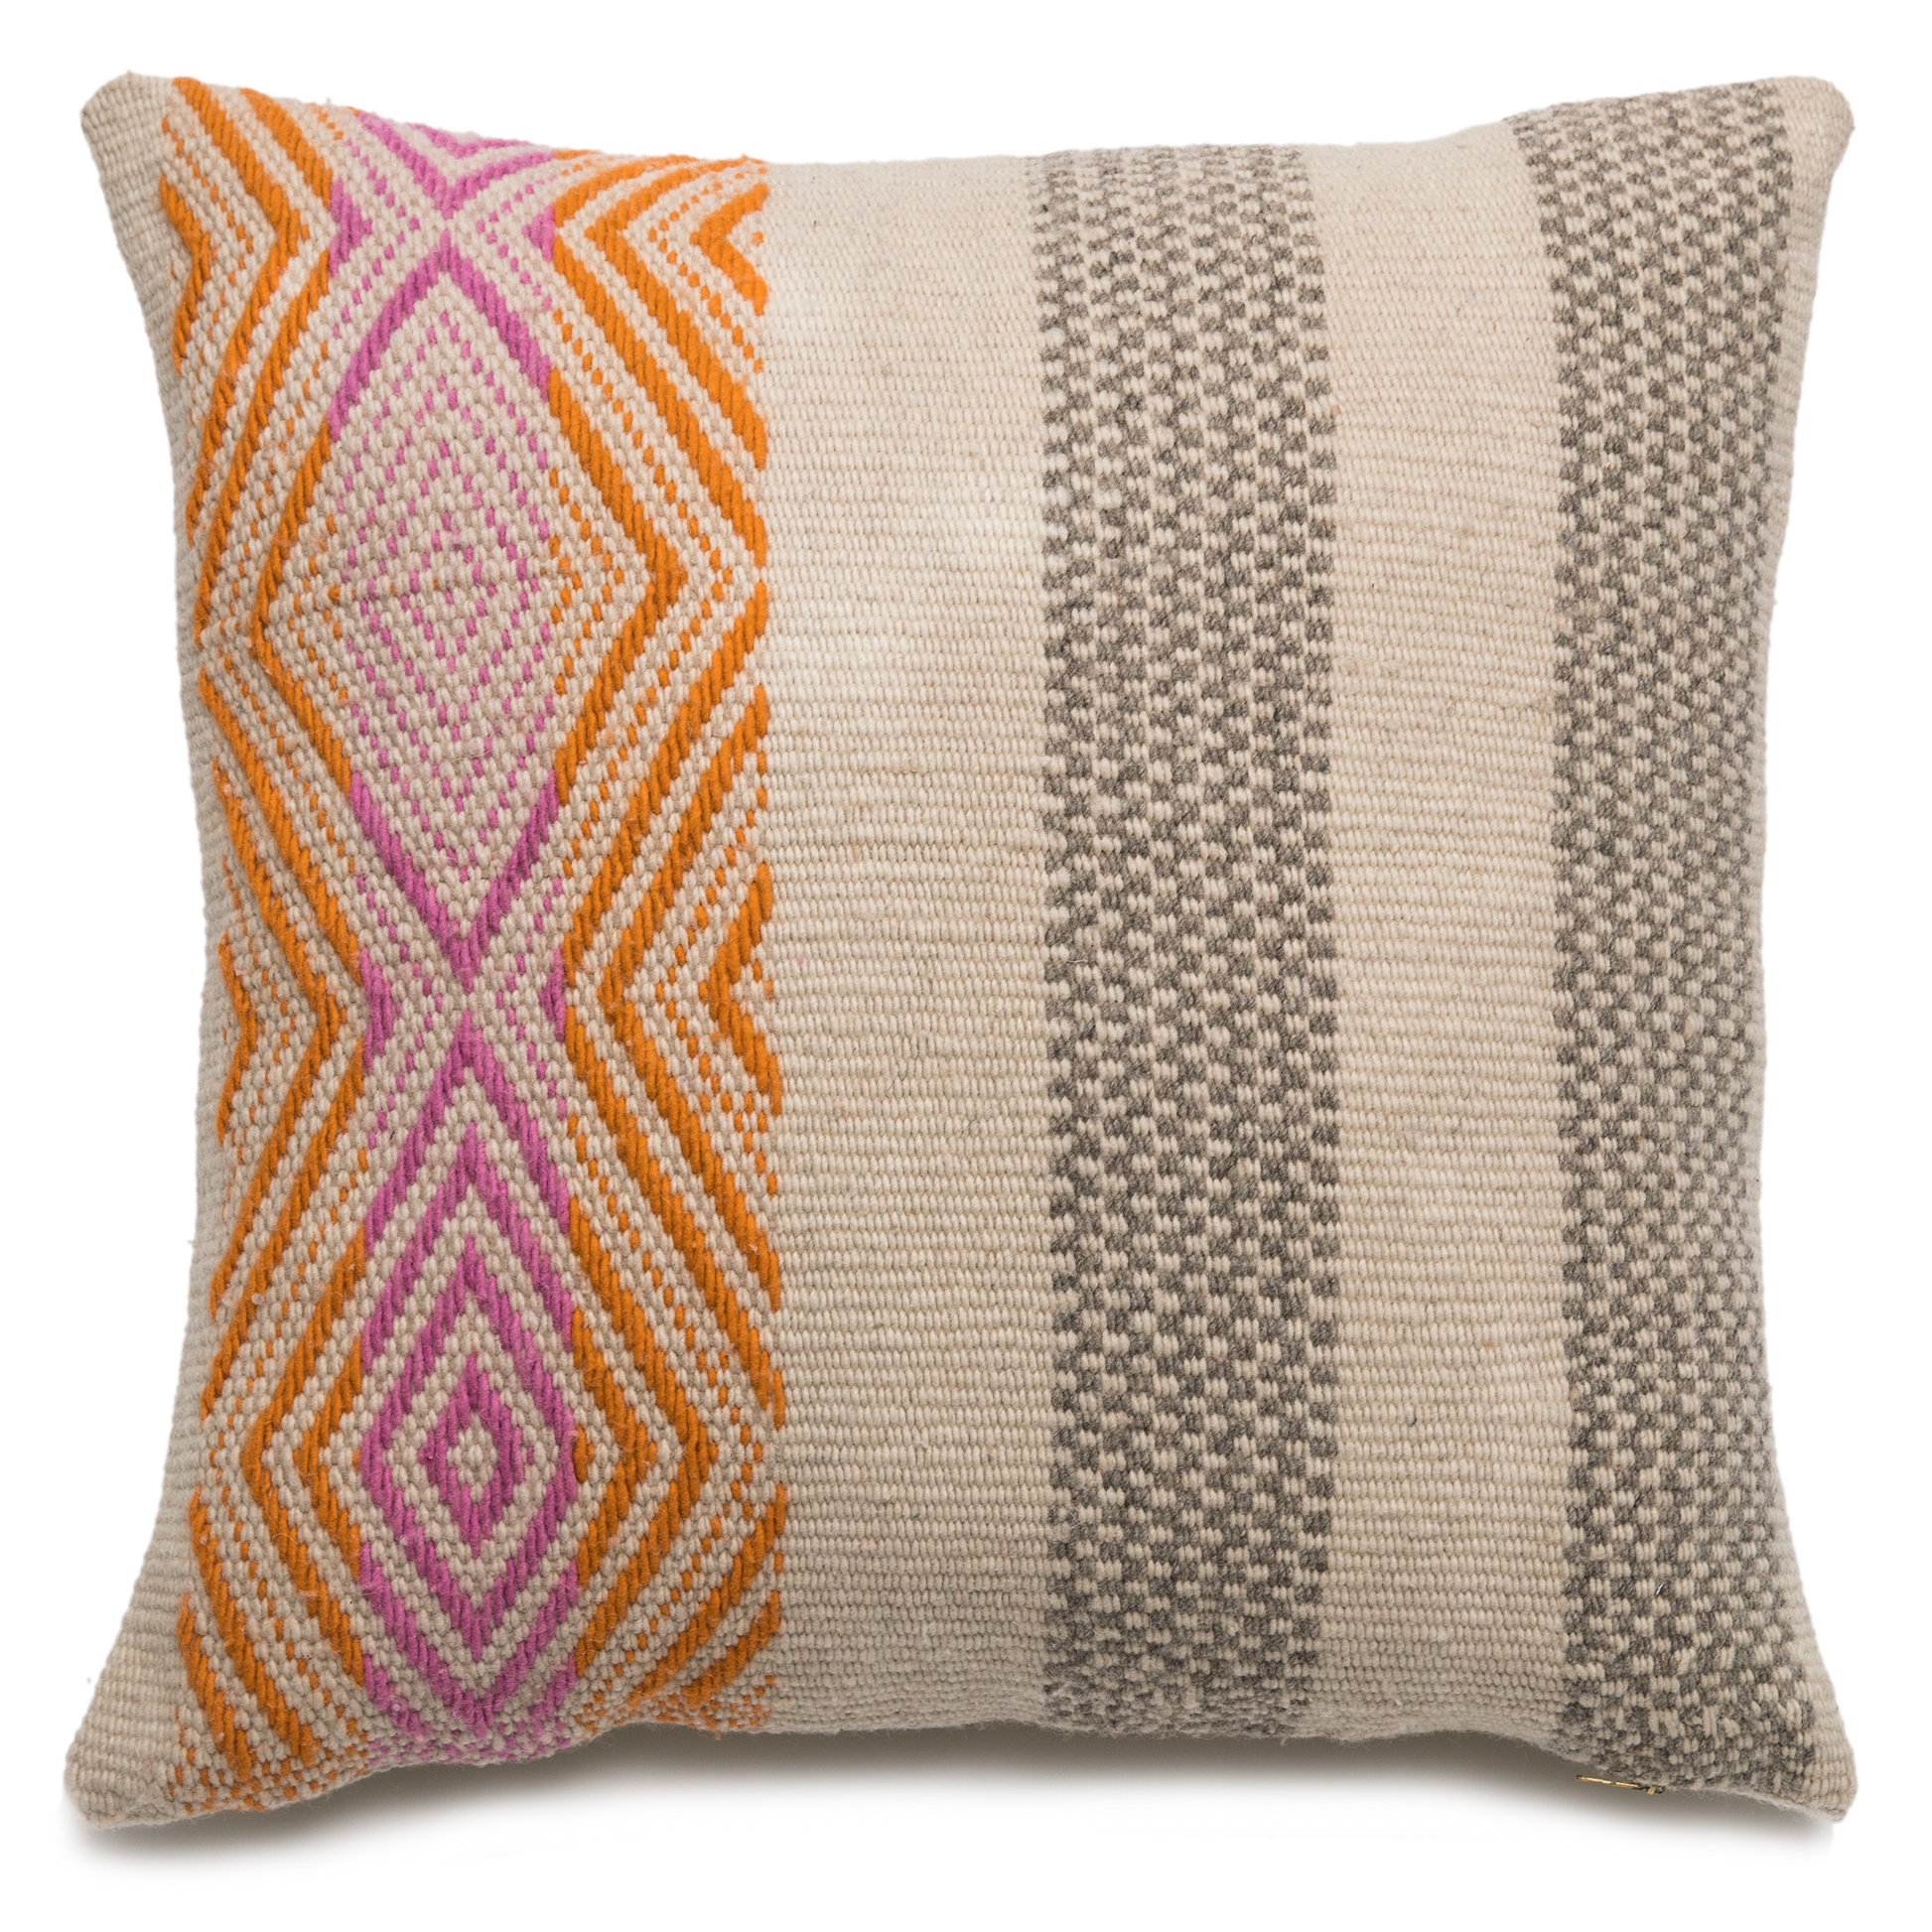 sacred valley throw pillow handloom woven wool frazada pillow peruvian magenta pink neutral grey taupe color pop